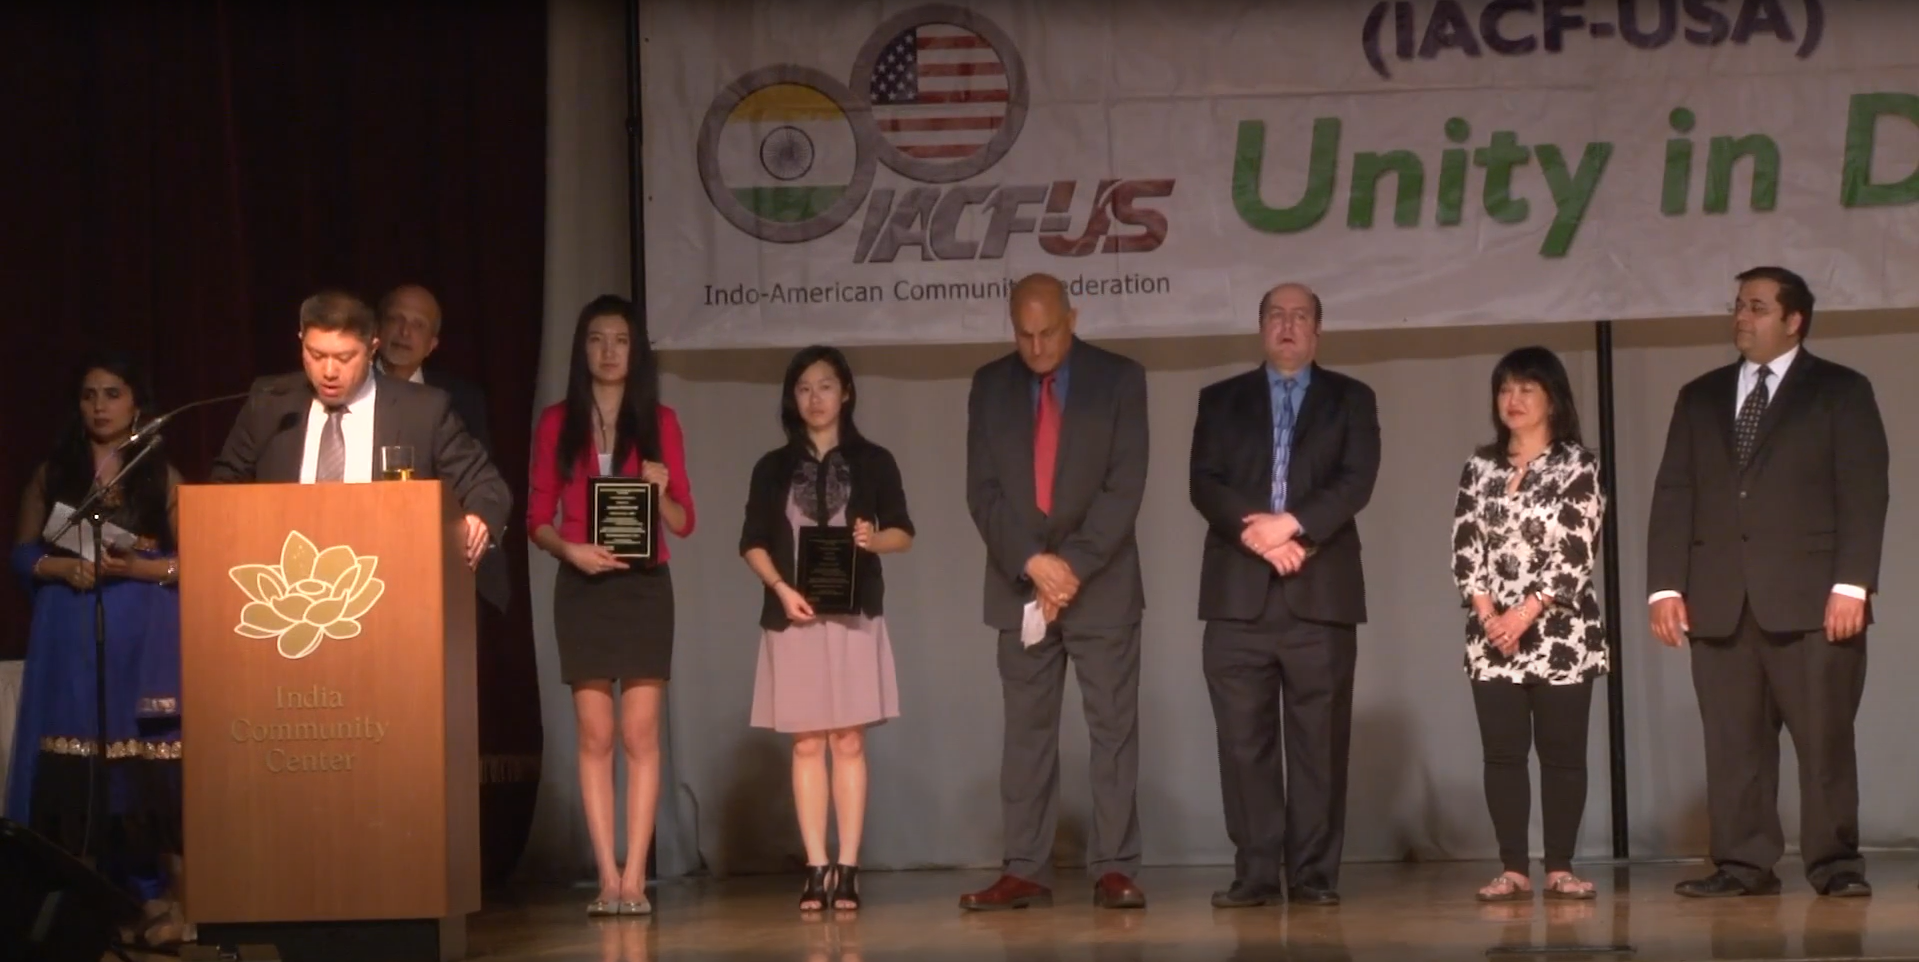 The 13th Annual Unity Dinner 2014